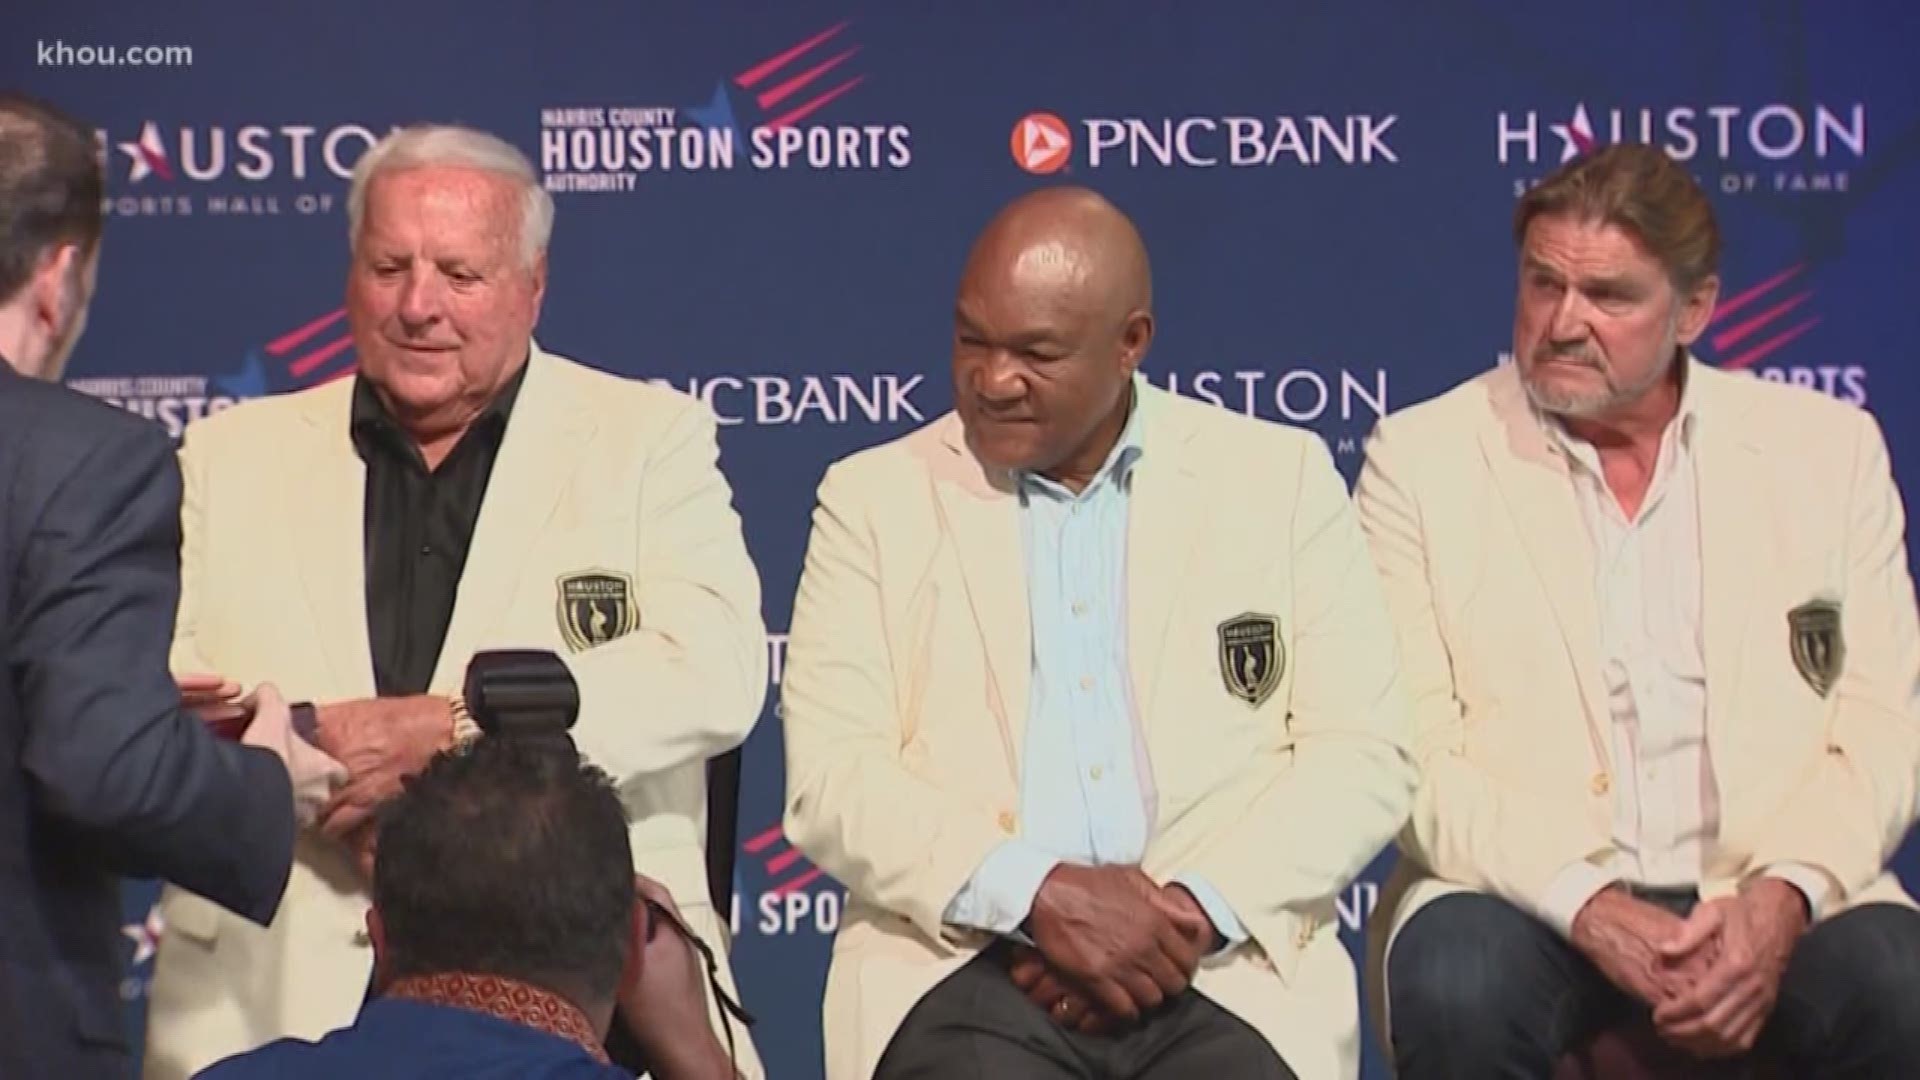 Masters Champion Jacki Burke, 4-time Indianapolis 500 winner AJ Foyt, former heavyweight champion George Foreman and former Oilers quarterback Dan Pastorini all received their Houston Sports Hall of Fame rings.